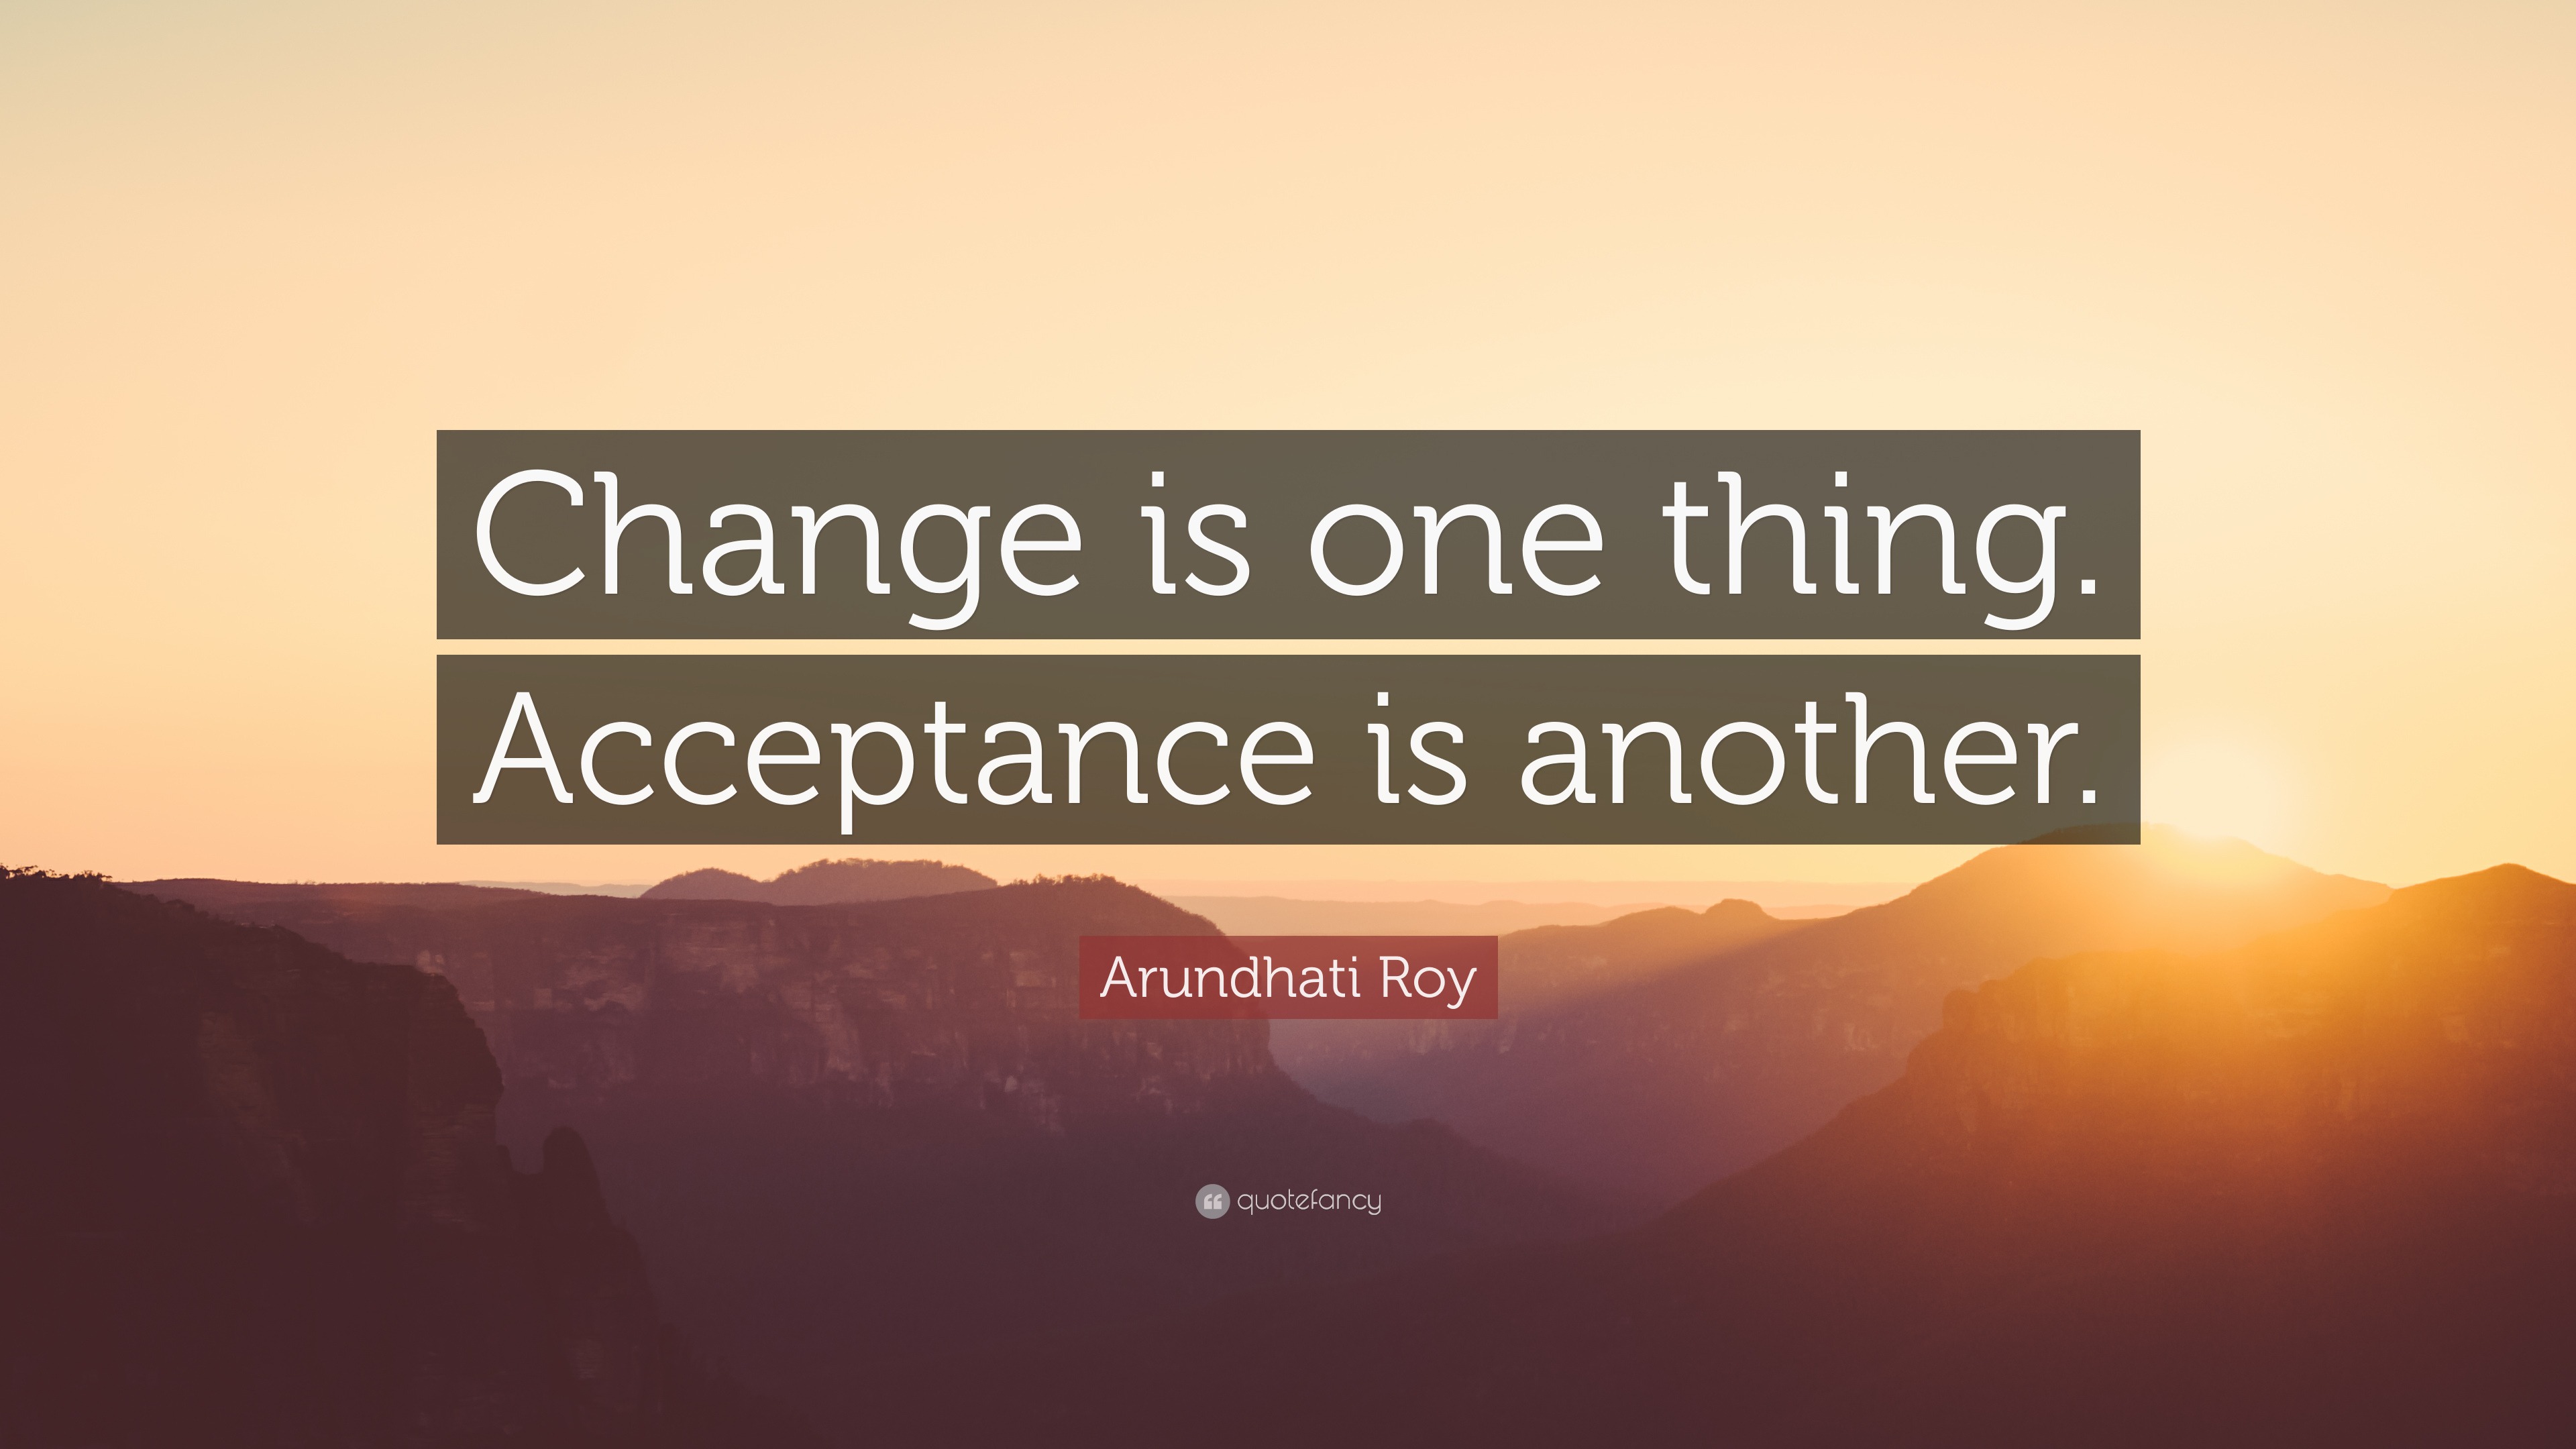 Arundhati Roy Quote: “Change is one thing. Acceptance is another.”